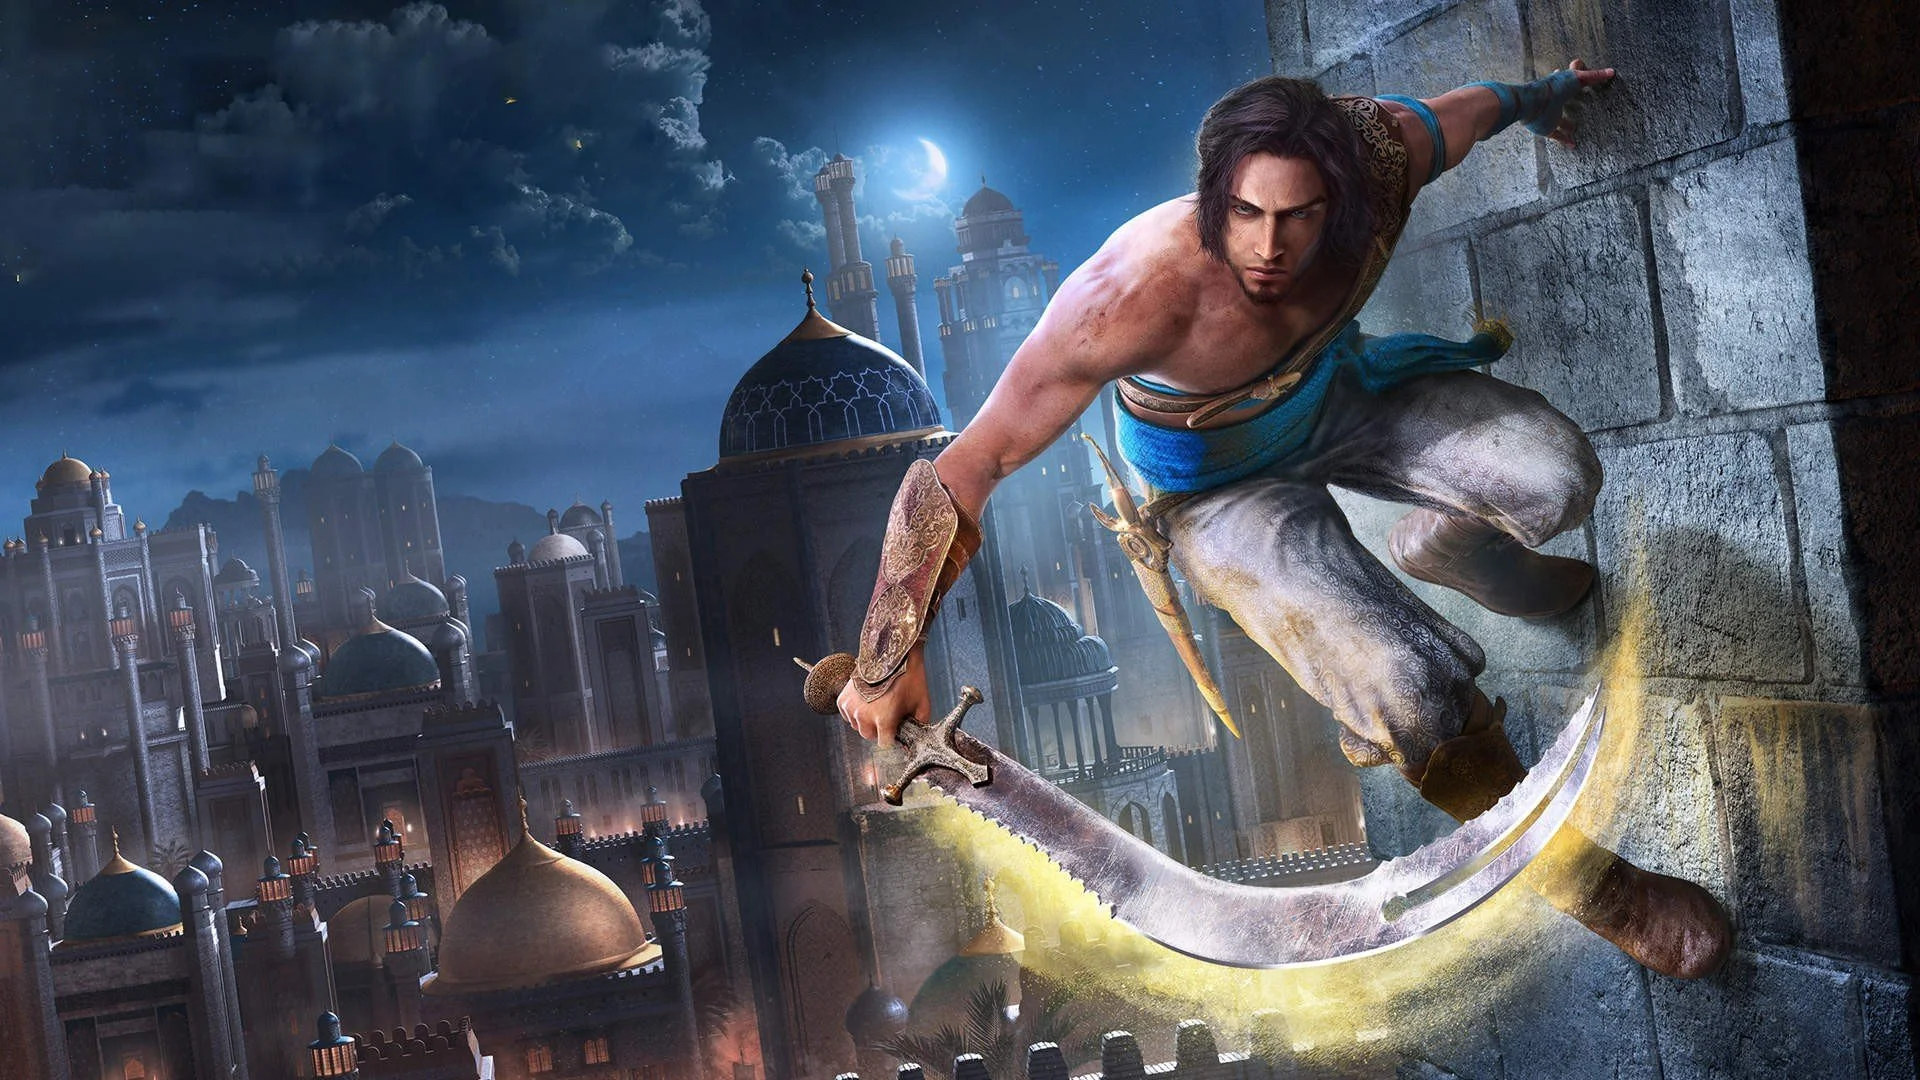 A remake of the cult adventure action game Prince of Persia: The Sands of Time has been announced